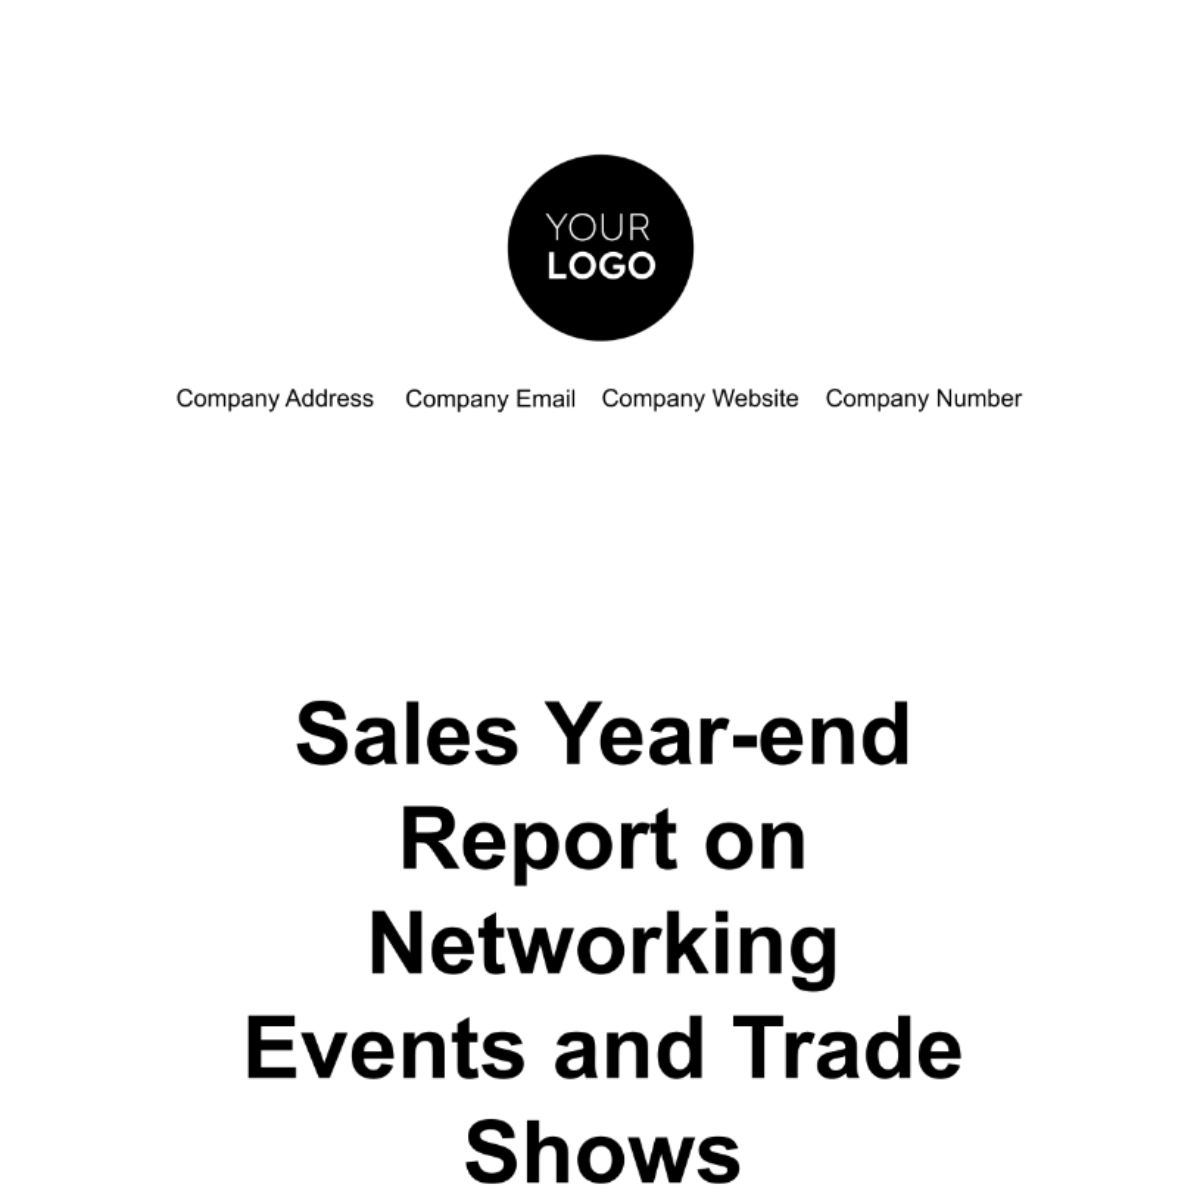 Sales Year-end Report on Networking Events and Trade Shows Template